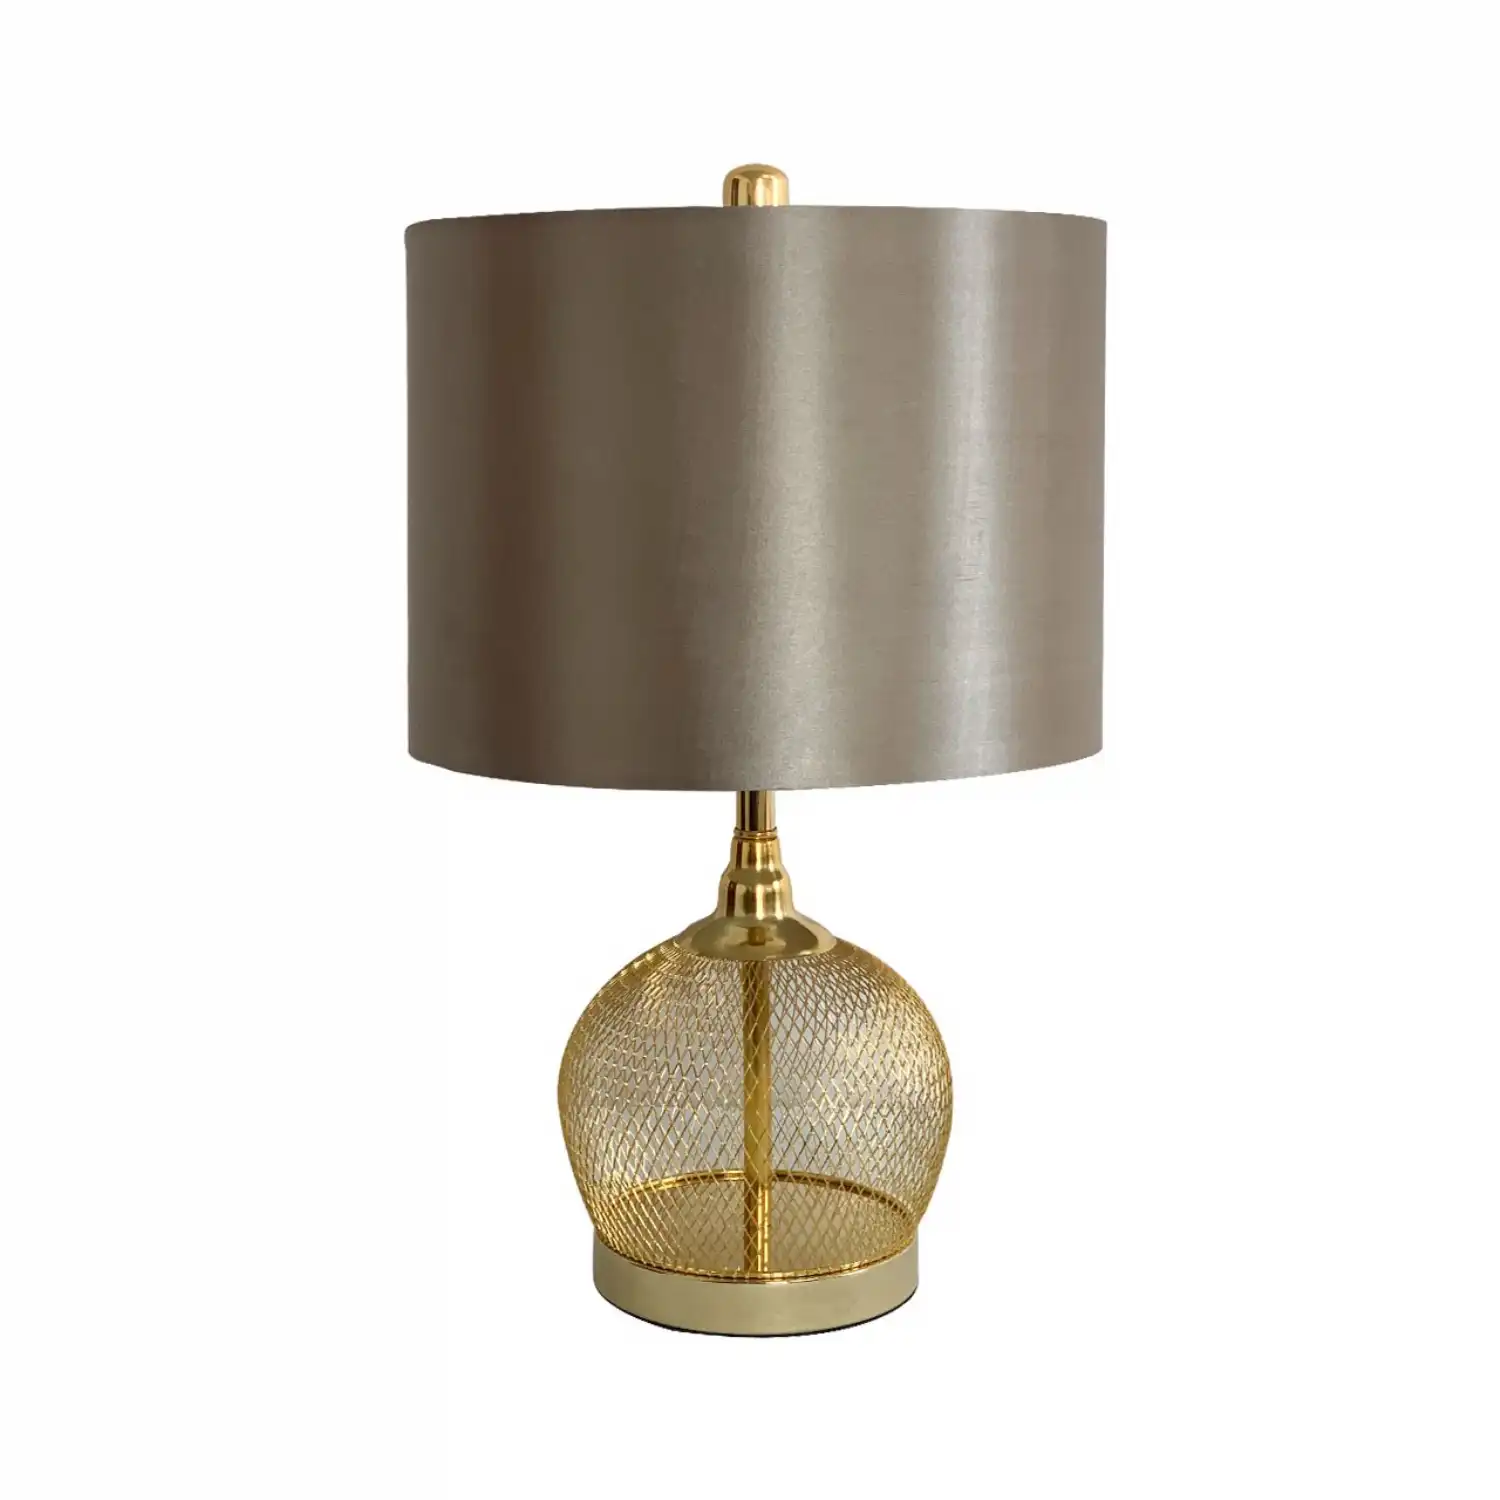 46cm Gold Wire Mesh Table Lamp Champagne Satin Shade